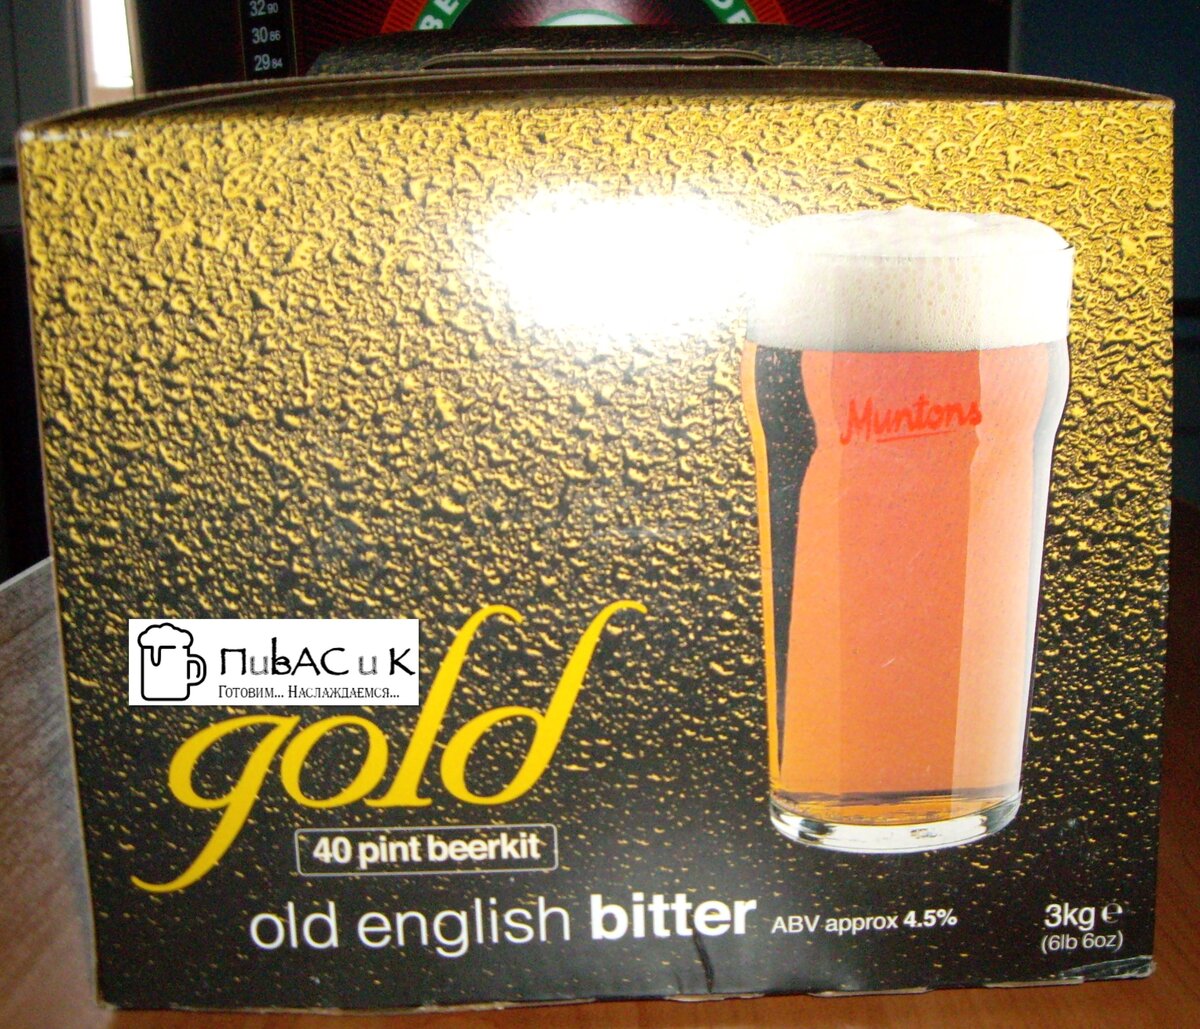 M…ntons Gold –  Old English Bitter